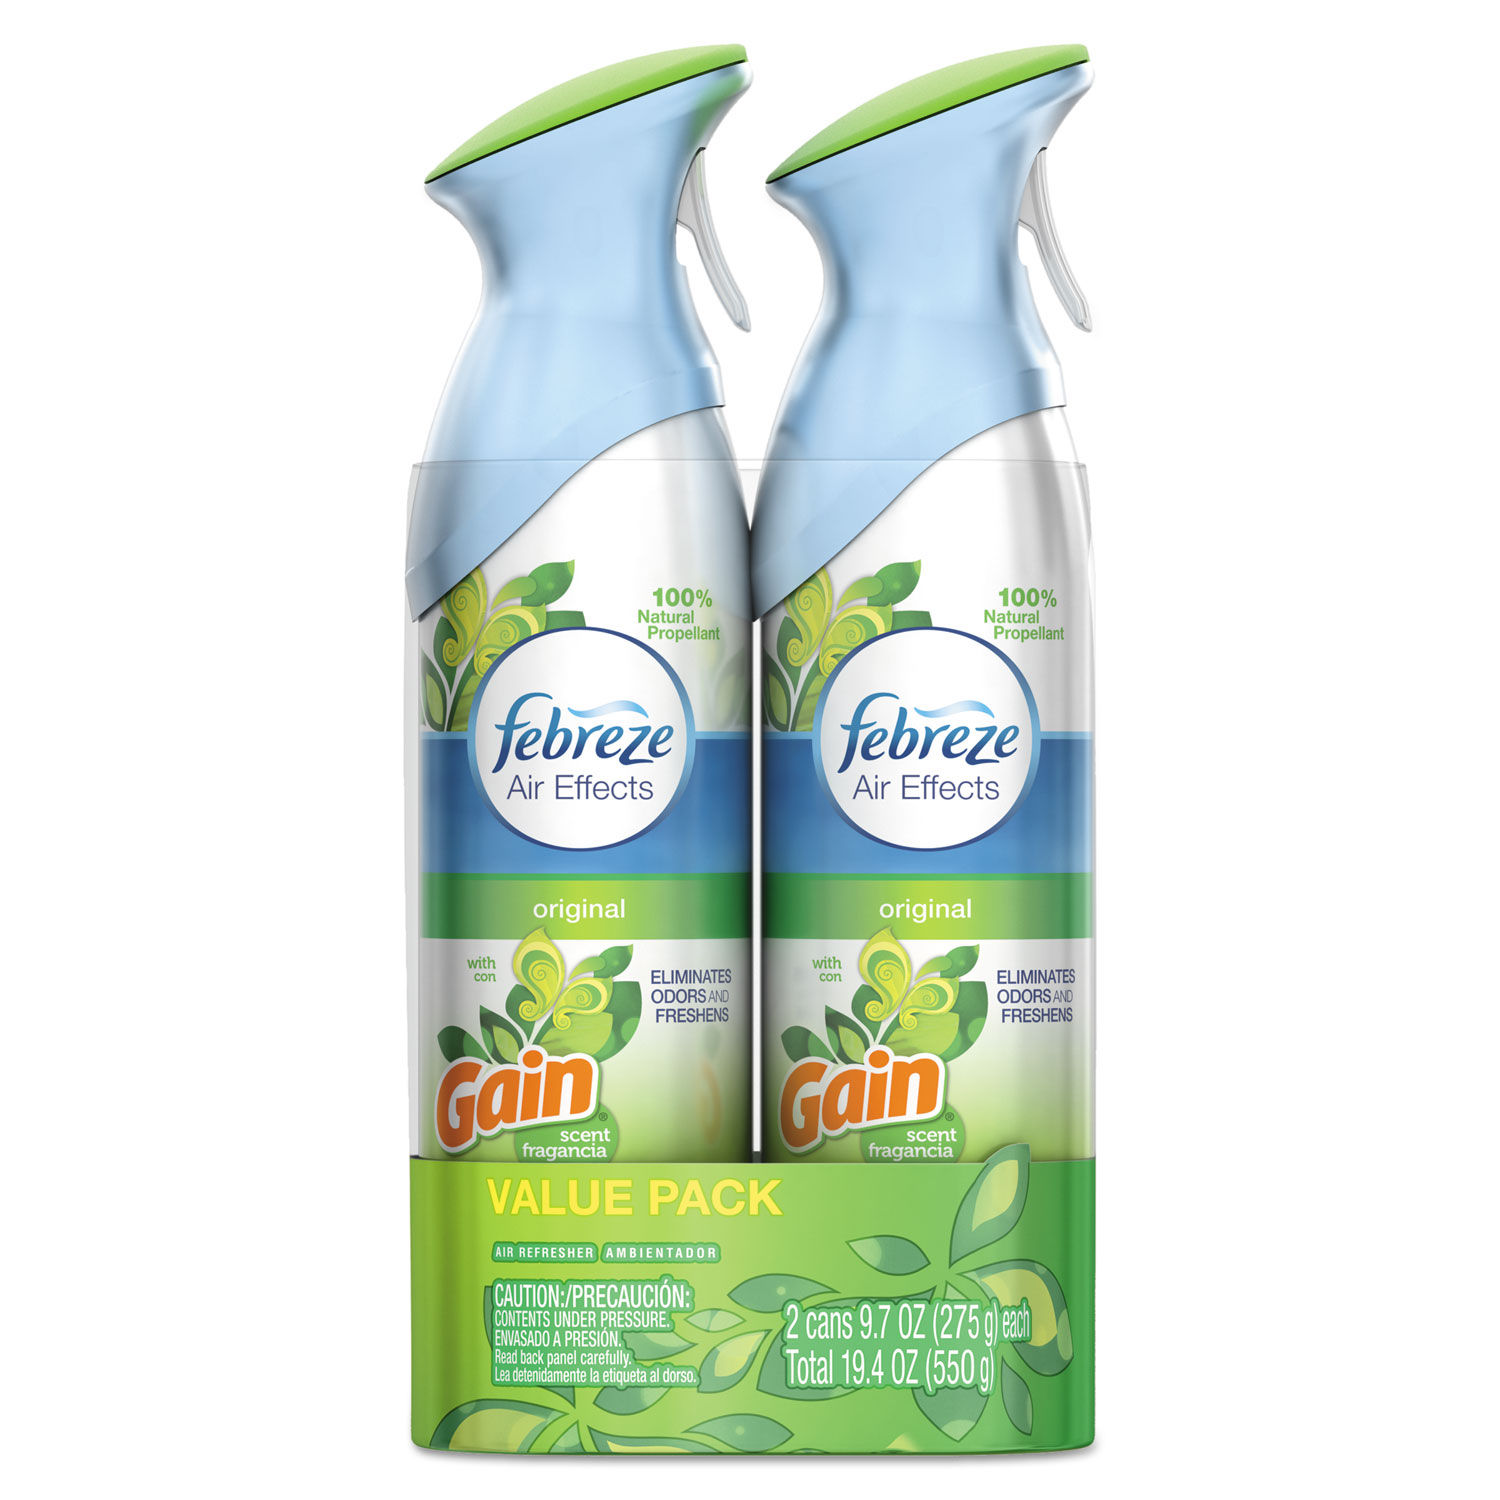 Febreze Air Air Refresher, with Gain Scent Moonlight Breeze, Value Pack - 2 pack, 8.8 oz bottles